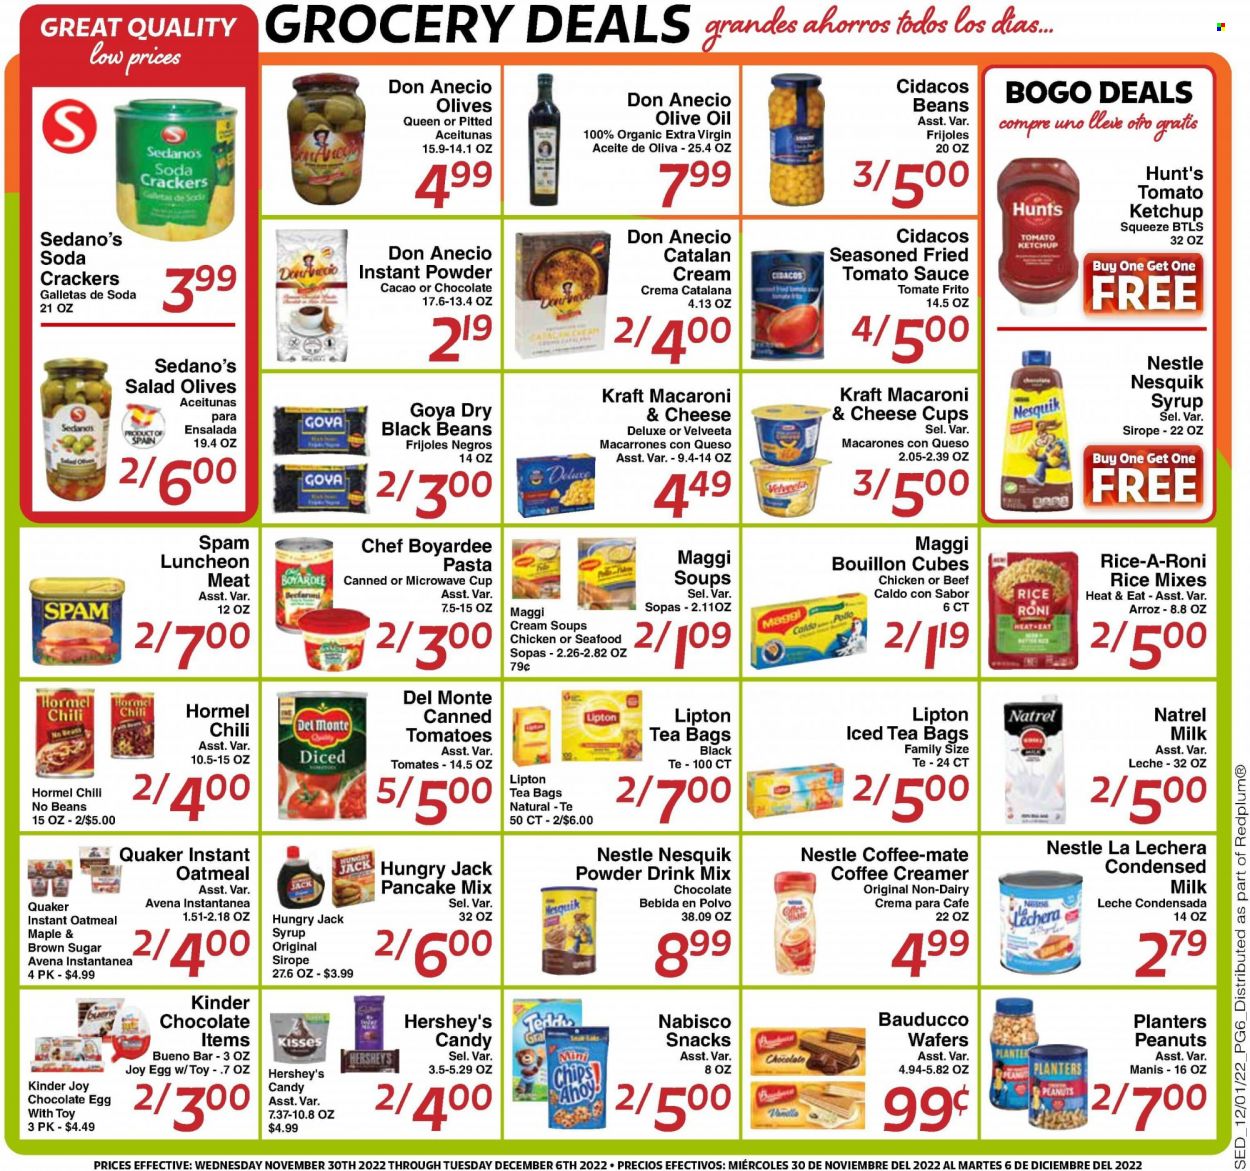 thumbnail - Sedano's Flyer - 11/30/2022 - 12/06/2022 - Sales products - tomatoes, seafood, macaroni & cheese, pasta, sauce, pancakes, Quaker, Kraft®, Hormel, Spam, lunch meat, cheese cup, Nesquik, Coffee-Mate, milk, condensed milk, eggs, creamer, Hershey's, Nestlé, wafers, chocolate, snack, Kinder Joy, crackers, chips, bouillon, oatmeal, Maggi, broth, black beans, tomato sauce, olives, Goya, Chef Boyardee, Del Monte, ketchup, extra virgin olive oil, olive oil, oil, syrup, peanuts, Planters, Lipton, soda, powder drink, tea bags. Page 6.